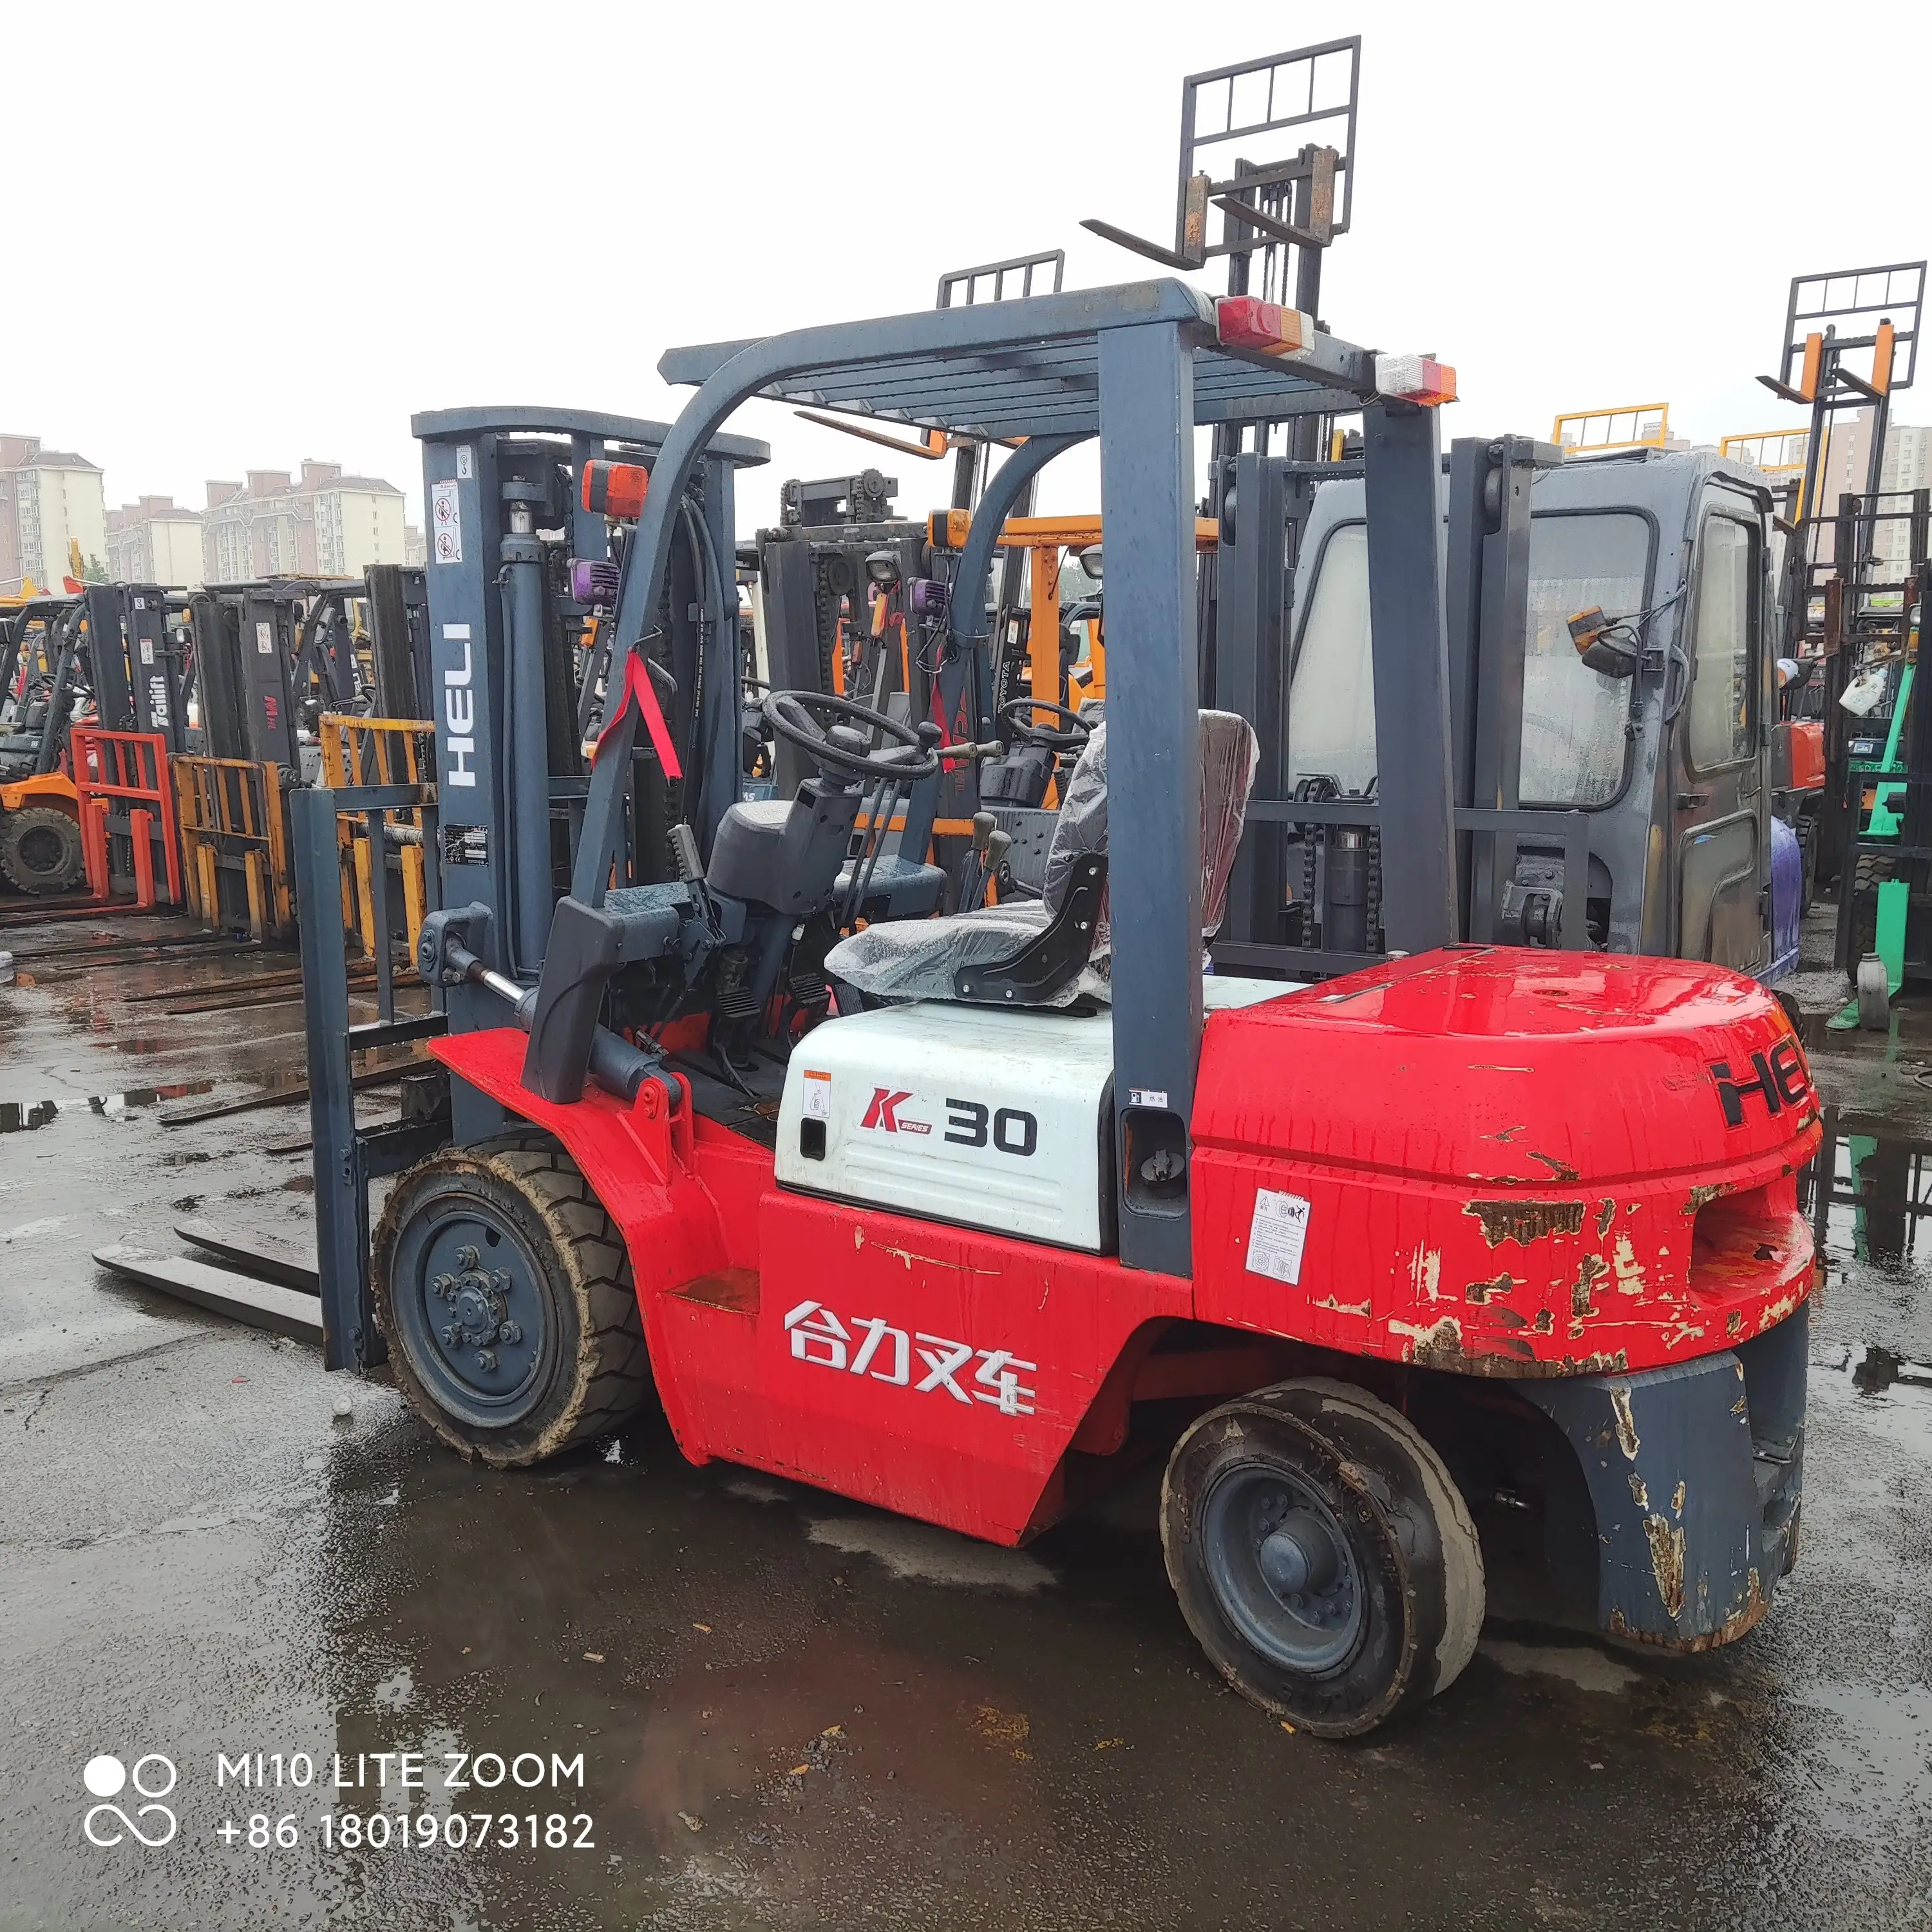 Used 3 Ton Heli Diesel Forklift with Pallet Jack Better Price 4 Ton 6 Ton 7 Ton Variants from China-for Sale